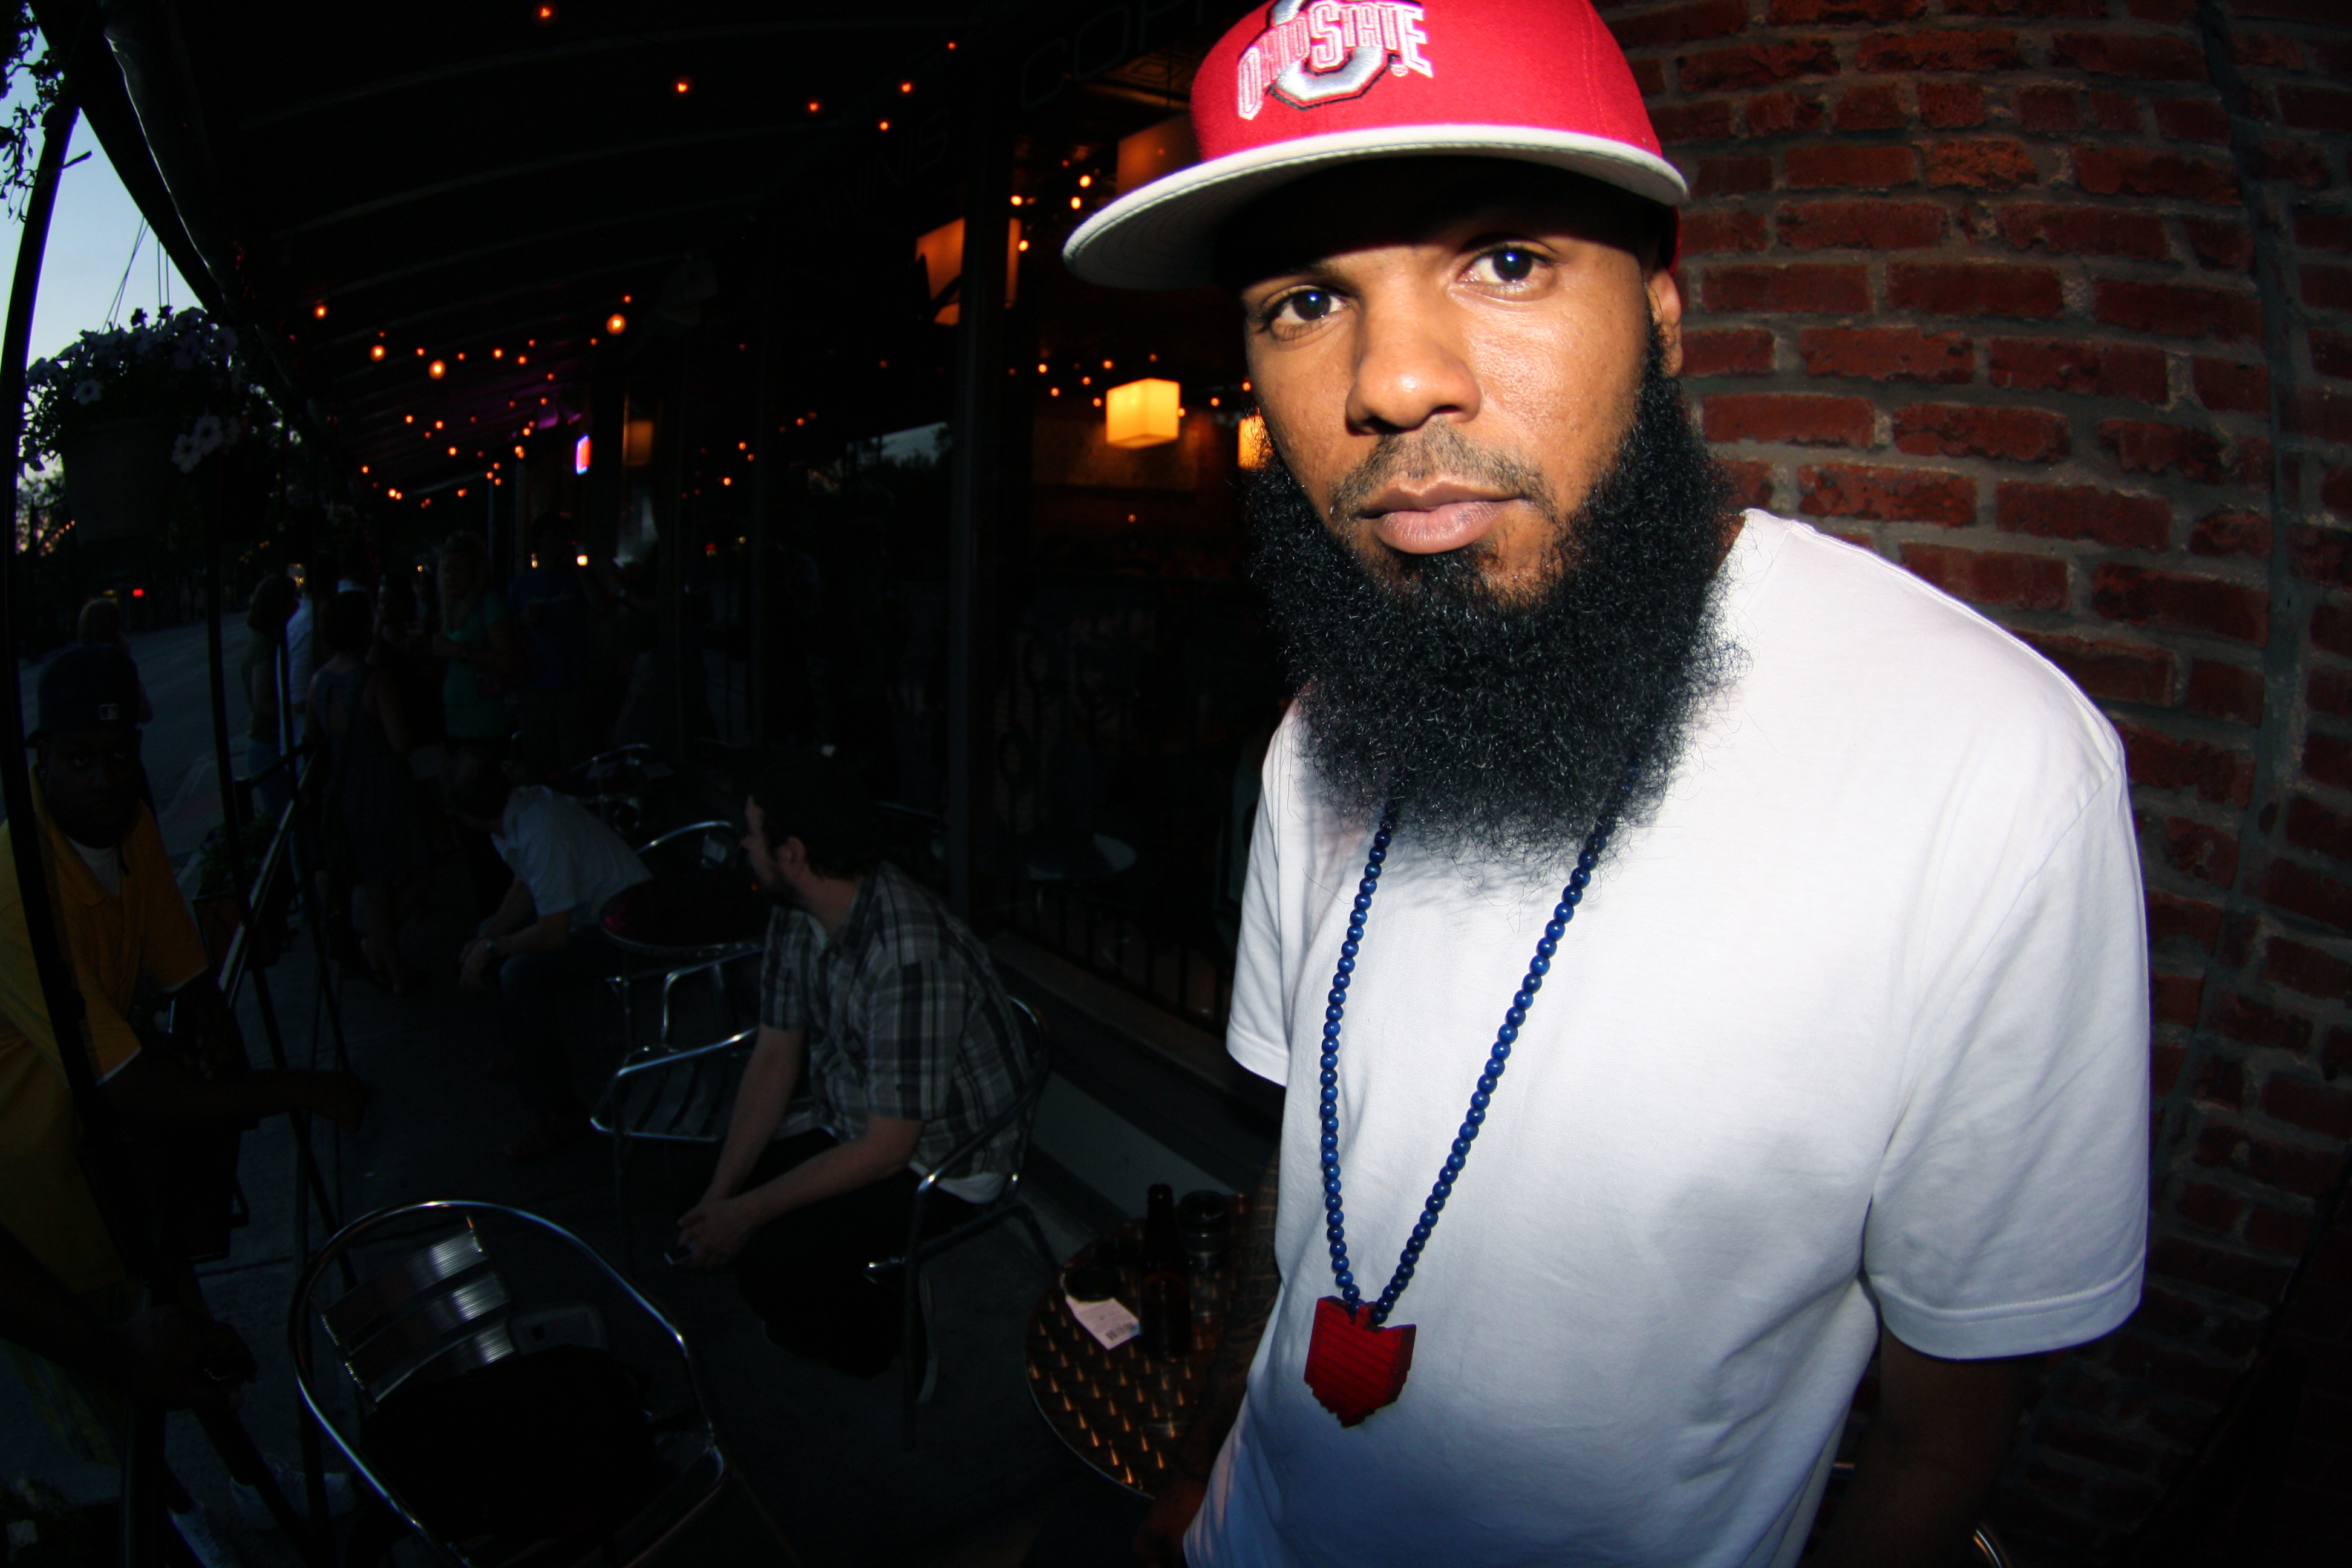 Stalley - "White Minks & Gator Sleeves" (Produced by Cardo)